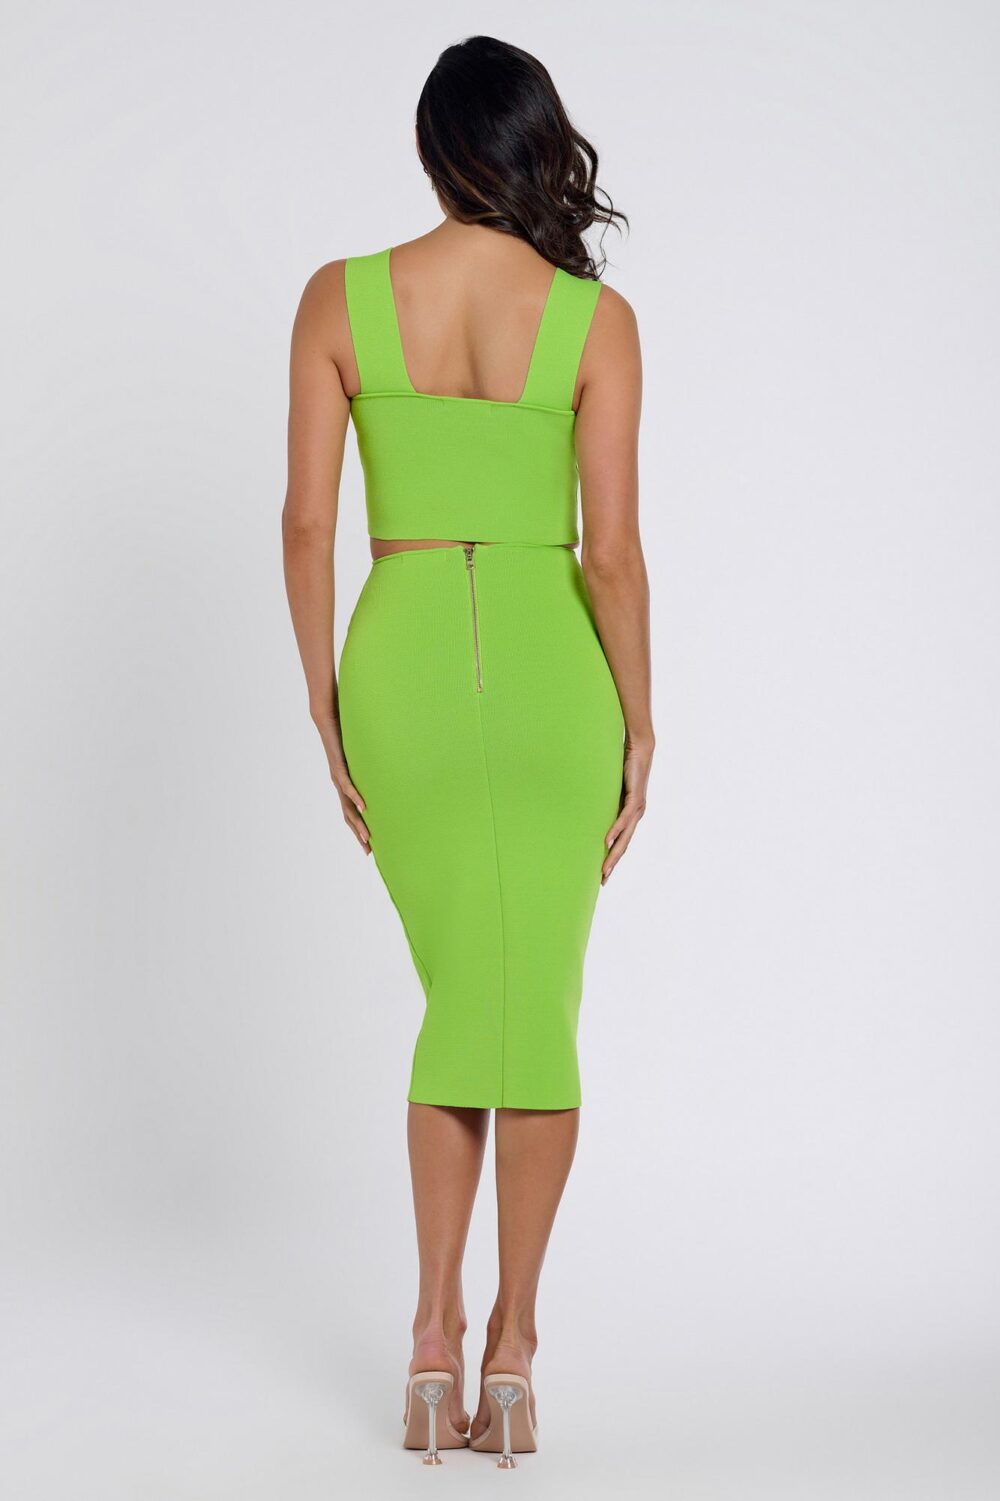 Ladies Skirt Colour is Lime